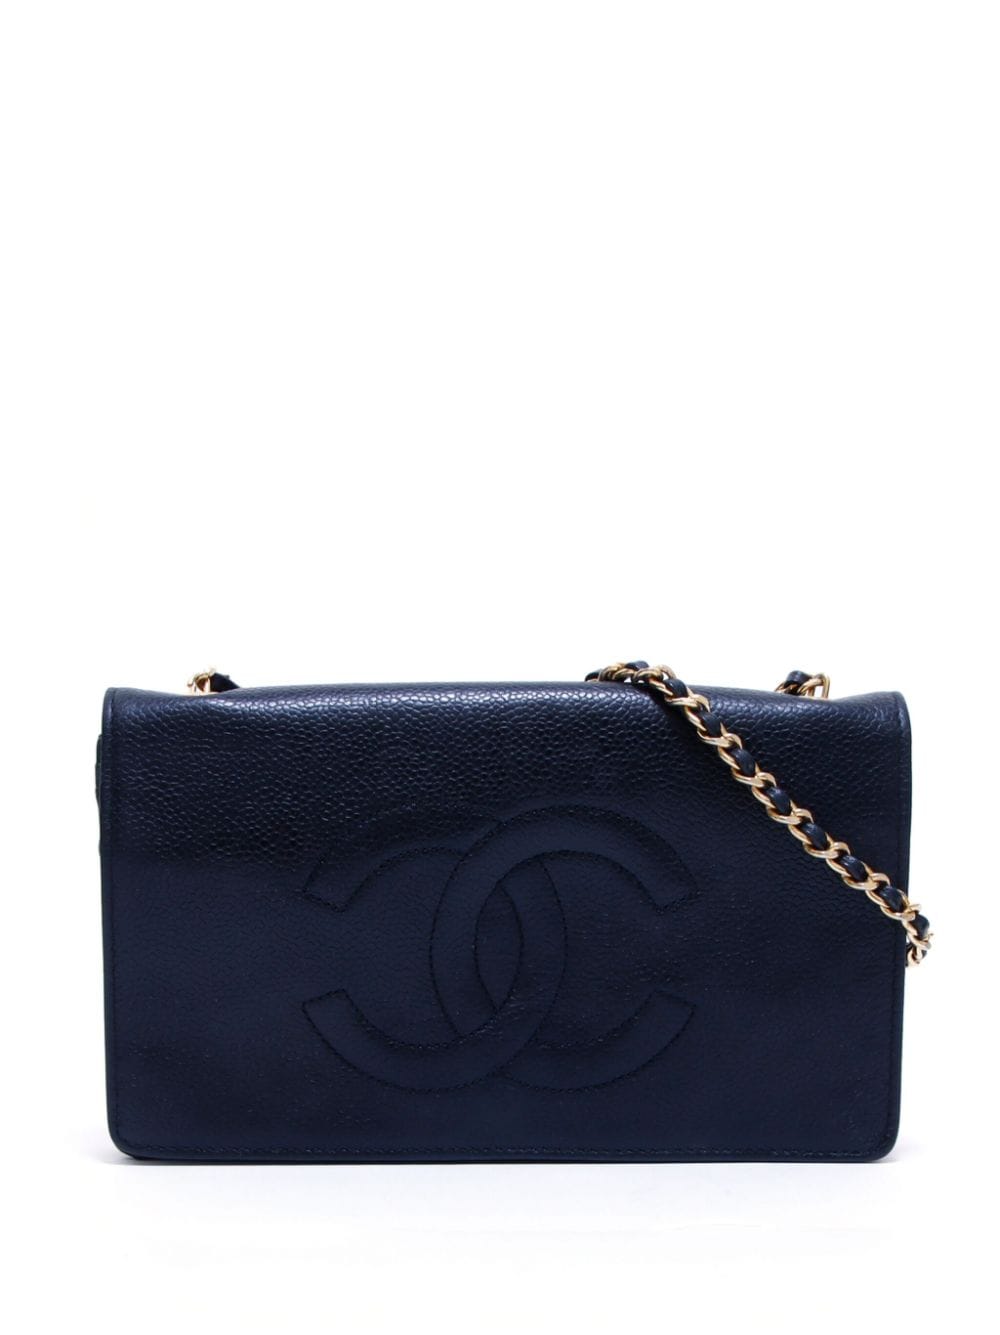 Pre-Owned & Vintage CHANEL Wallets for Women